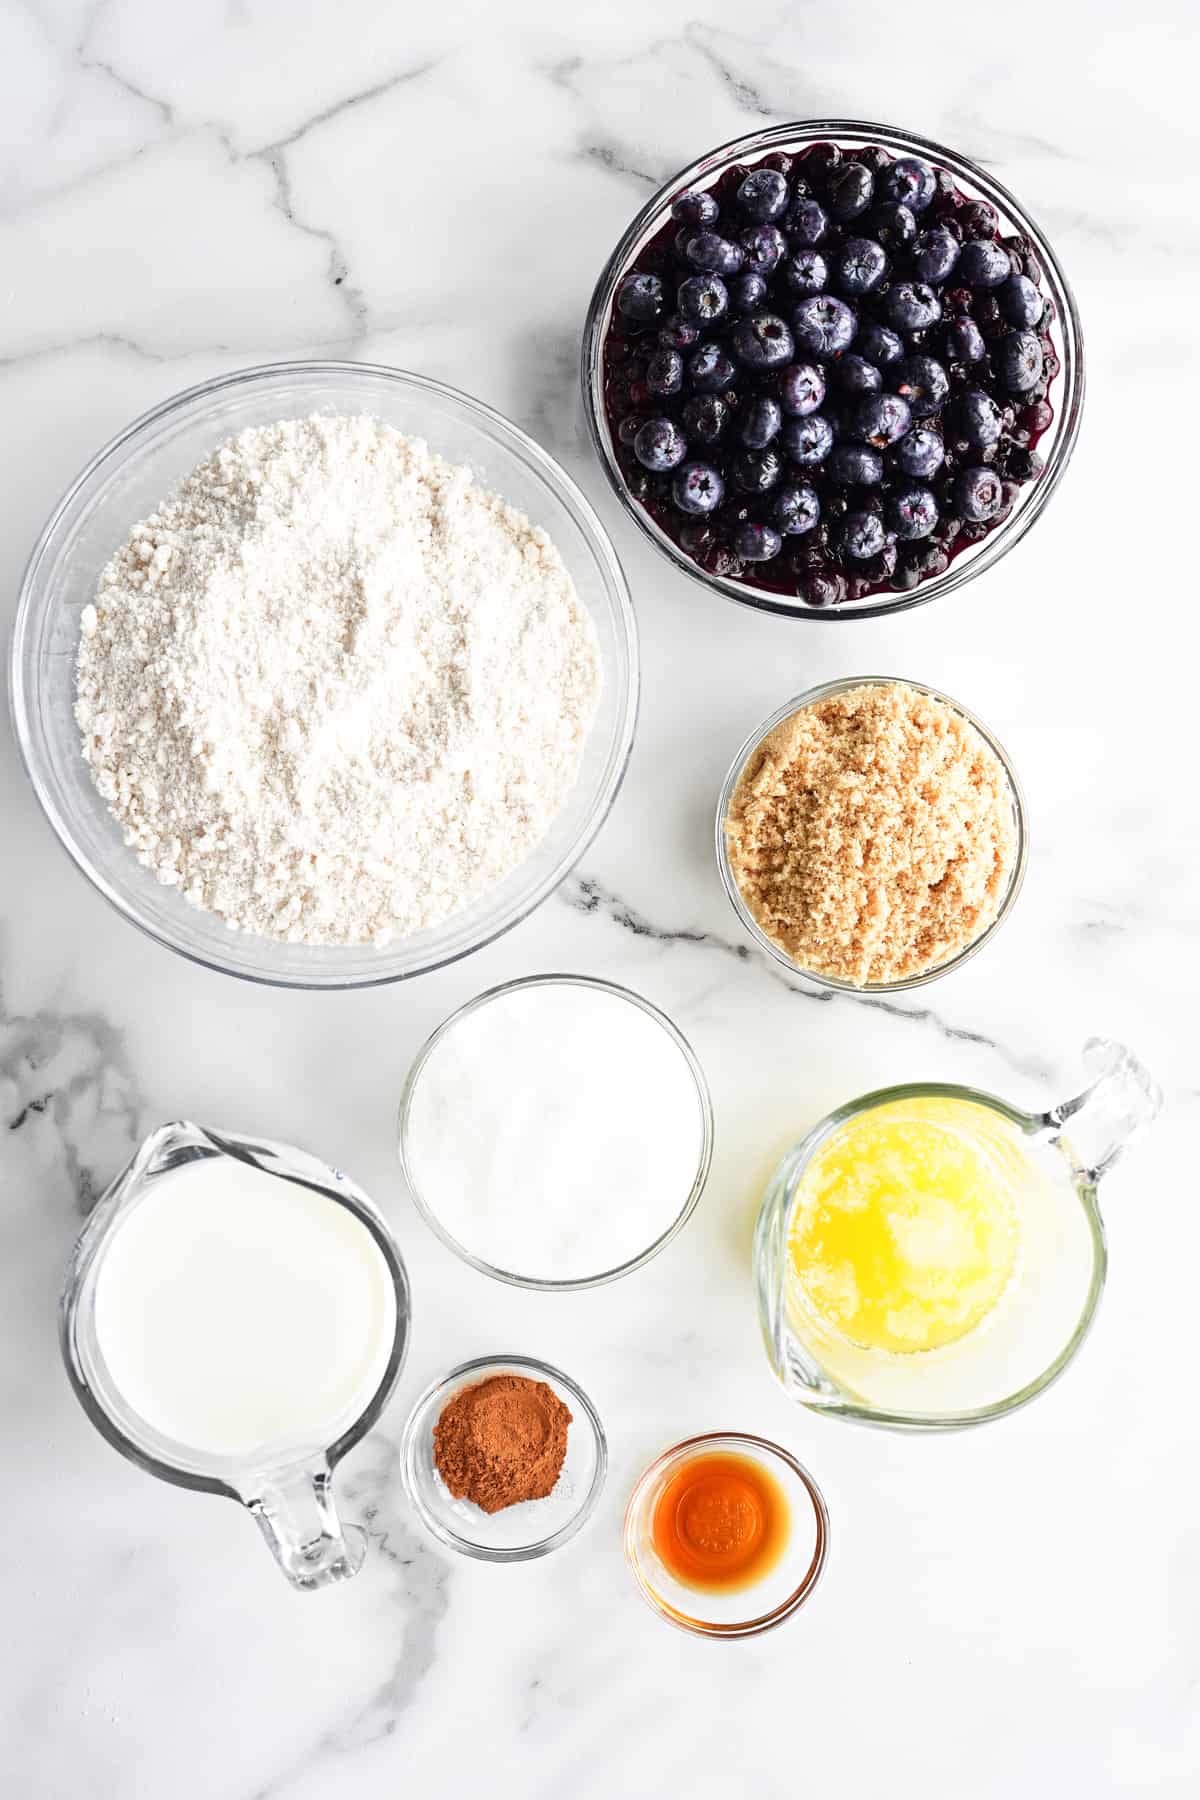 ingredients in bowls on a white countertop.